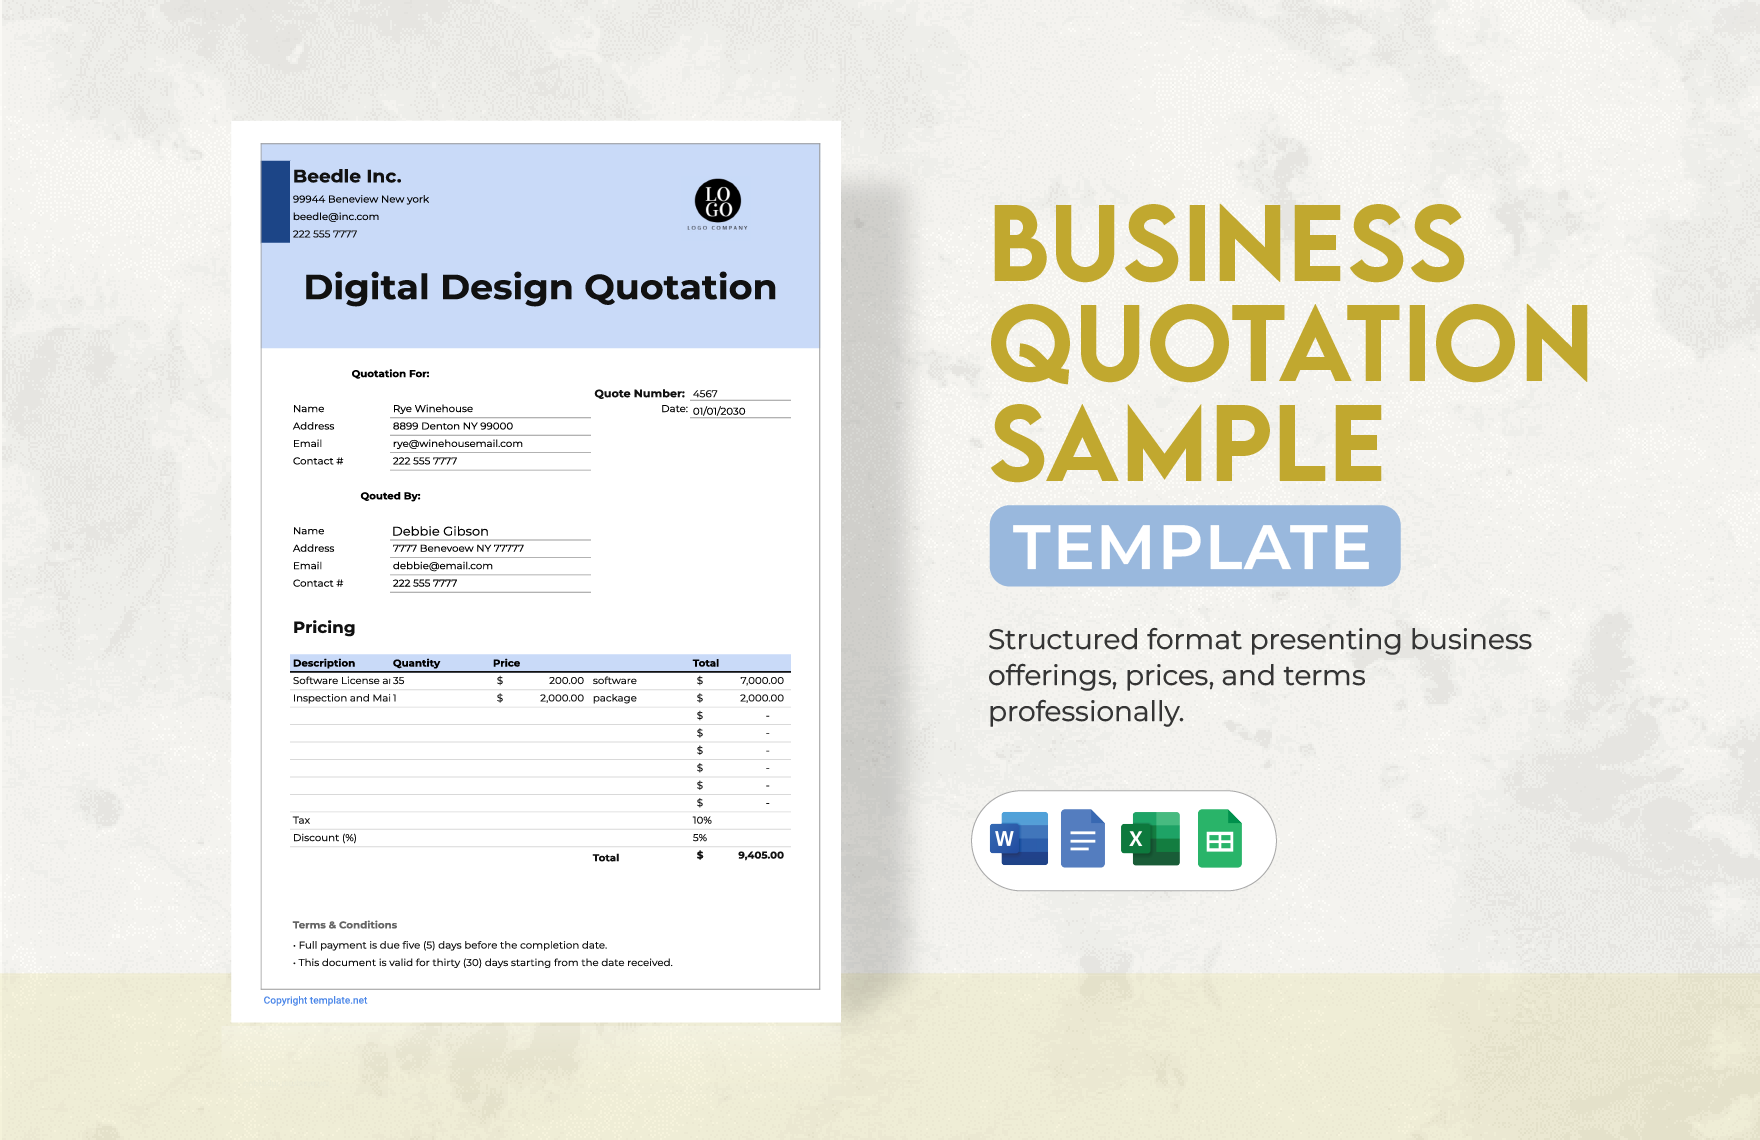 Business Quotation Sample Template in Word, Google Docs, Excel, Google Sheets